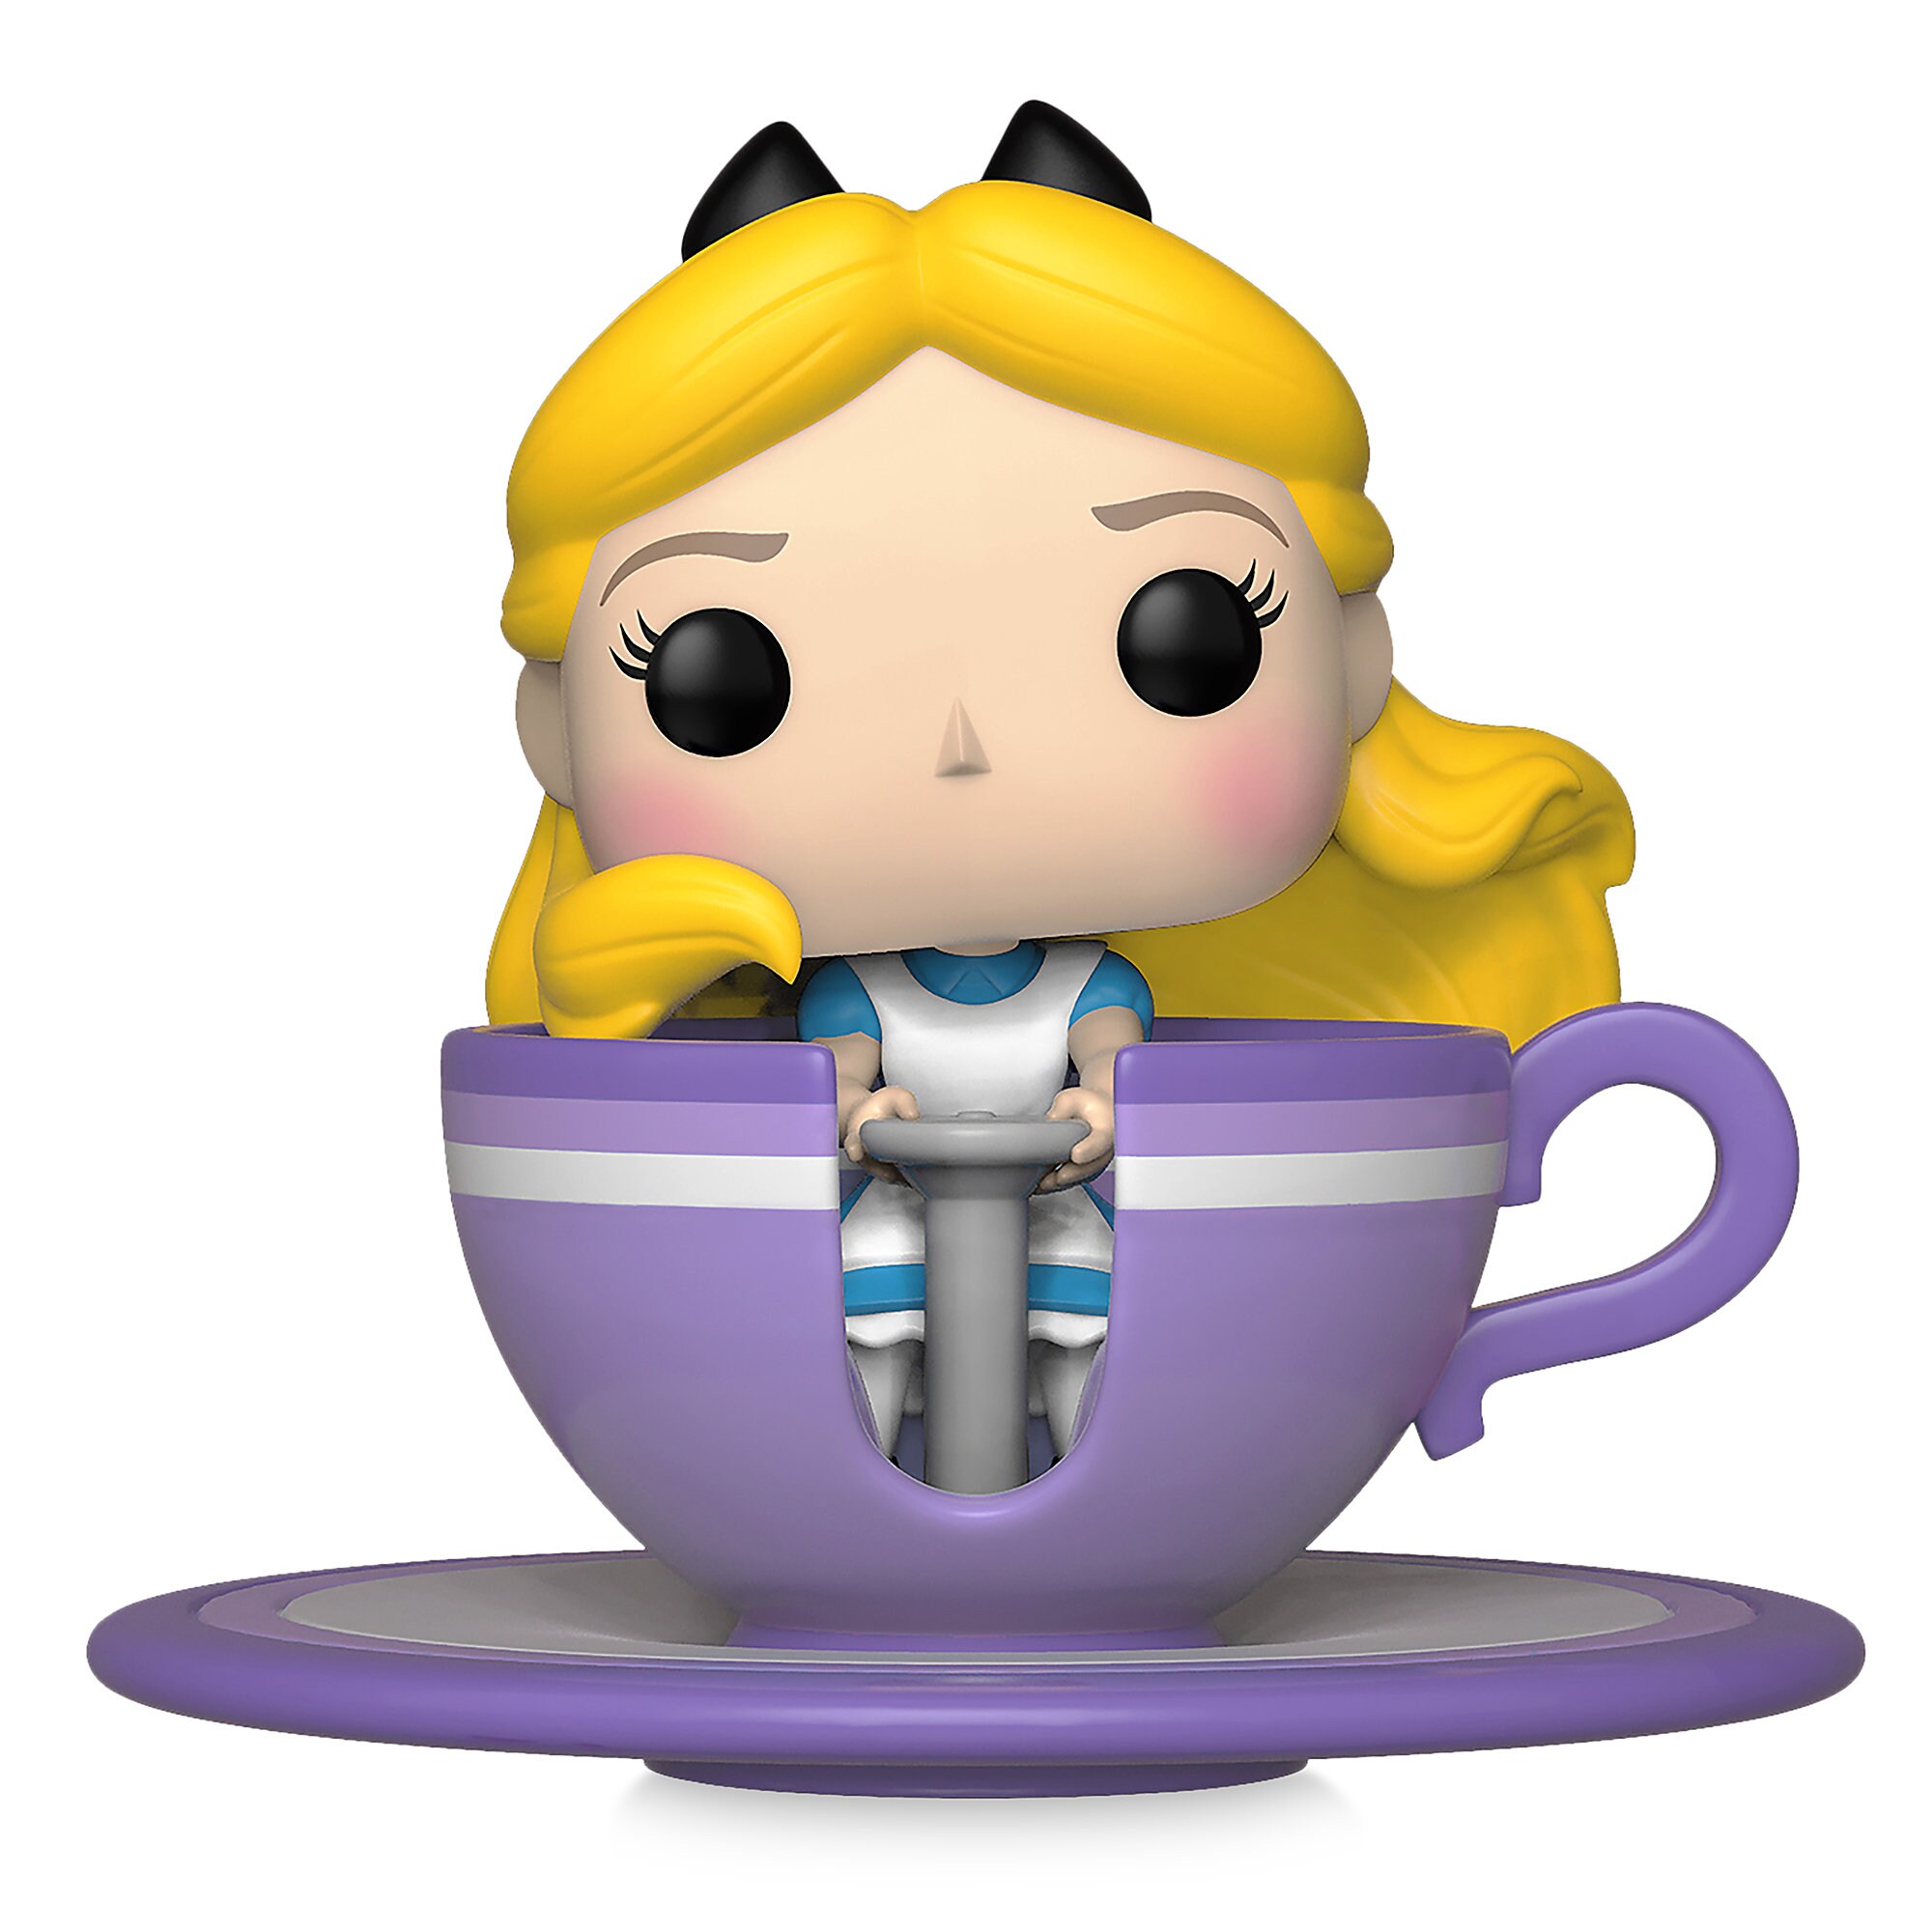 Alice at the Mad Tea Party POP! Vinyl Figure by Funko